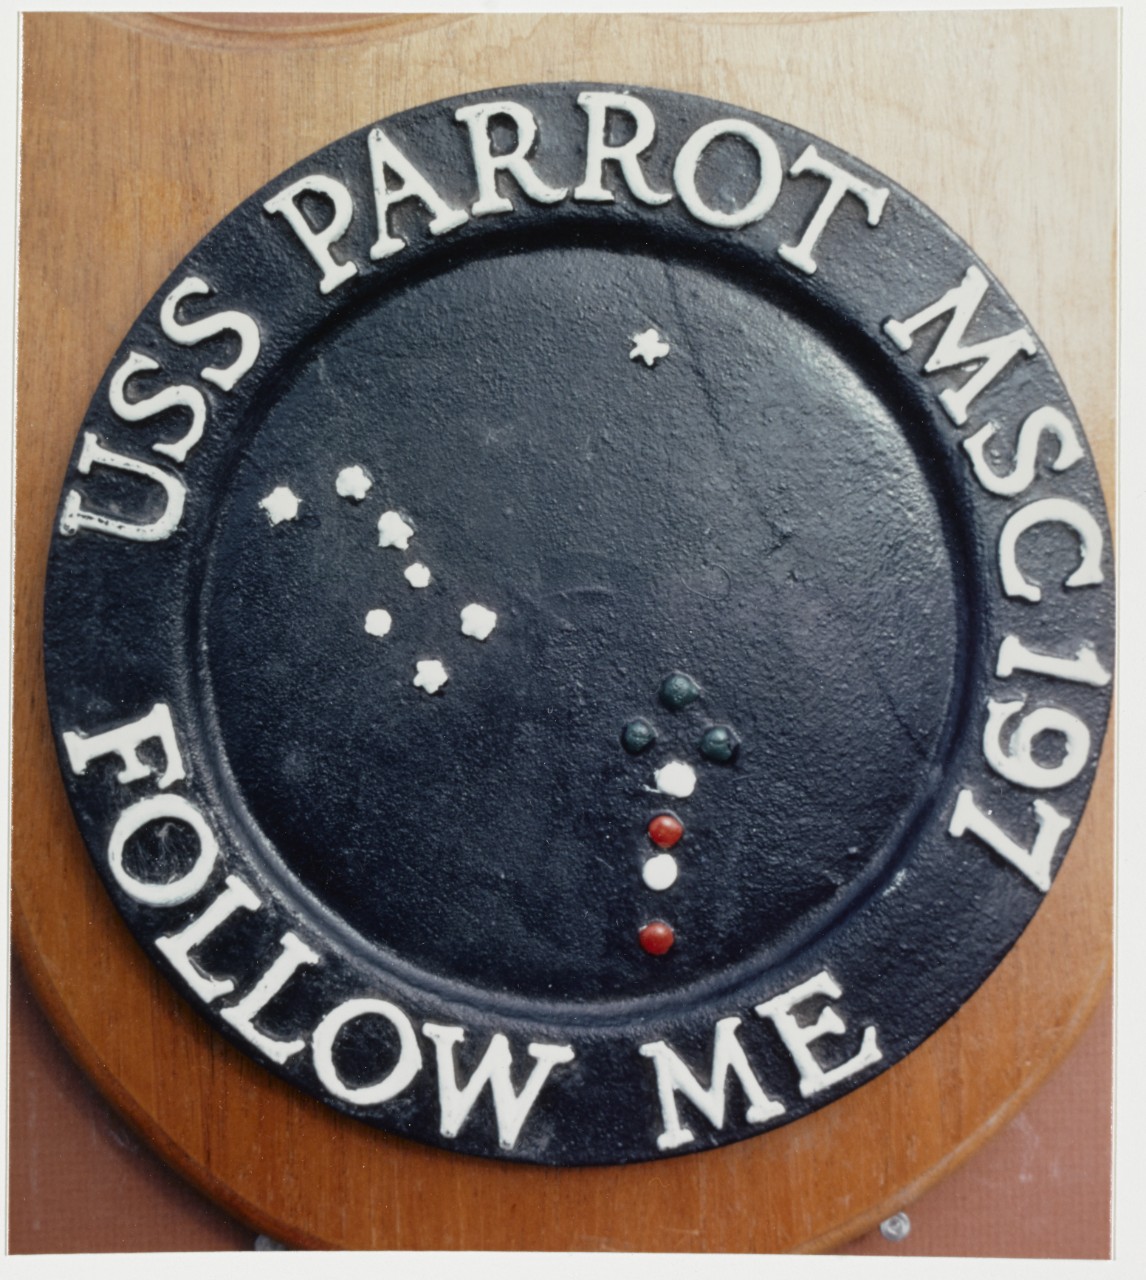 Insignia: USS PARROT (MSC-197) "Follow Me". Plaque received in 1965